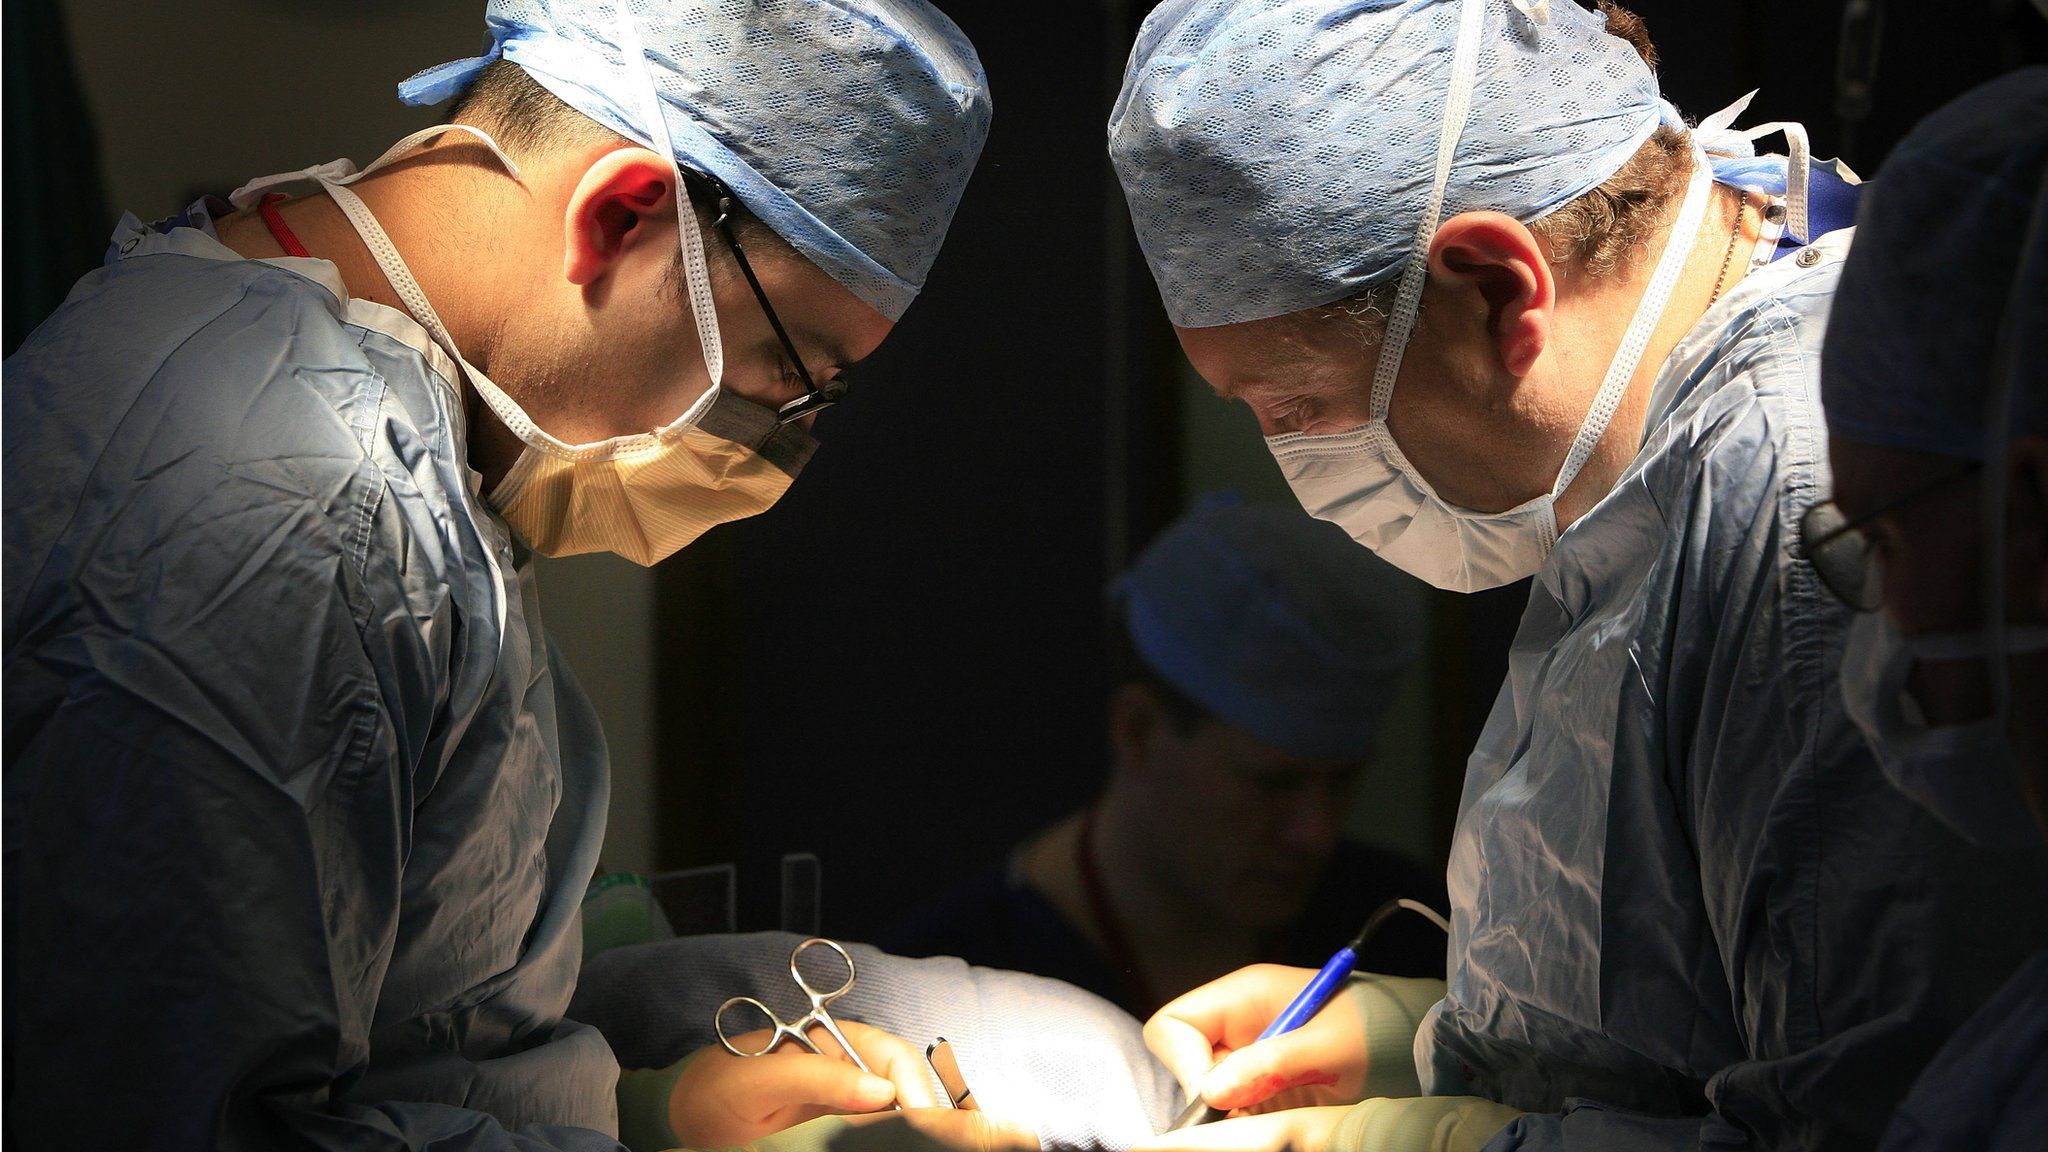 surgeons carry out a transplant